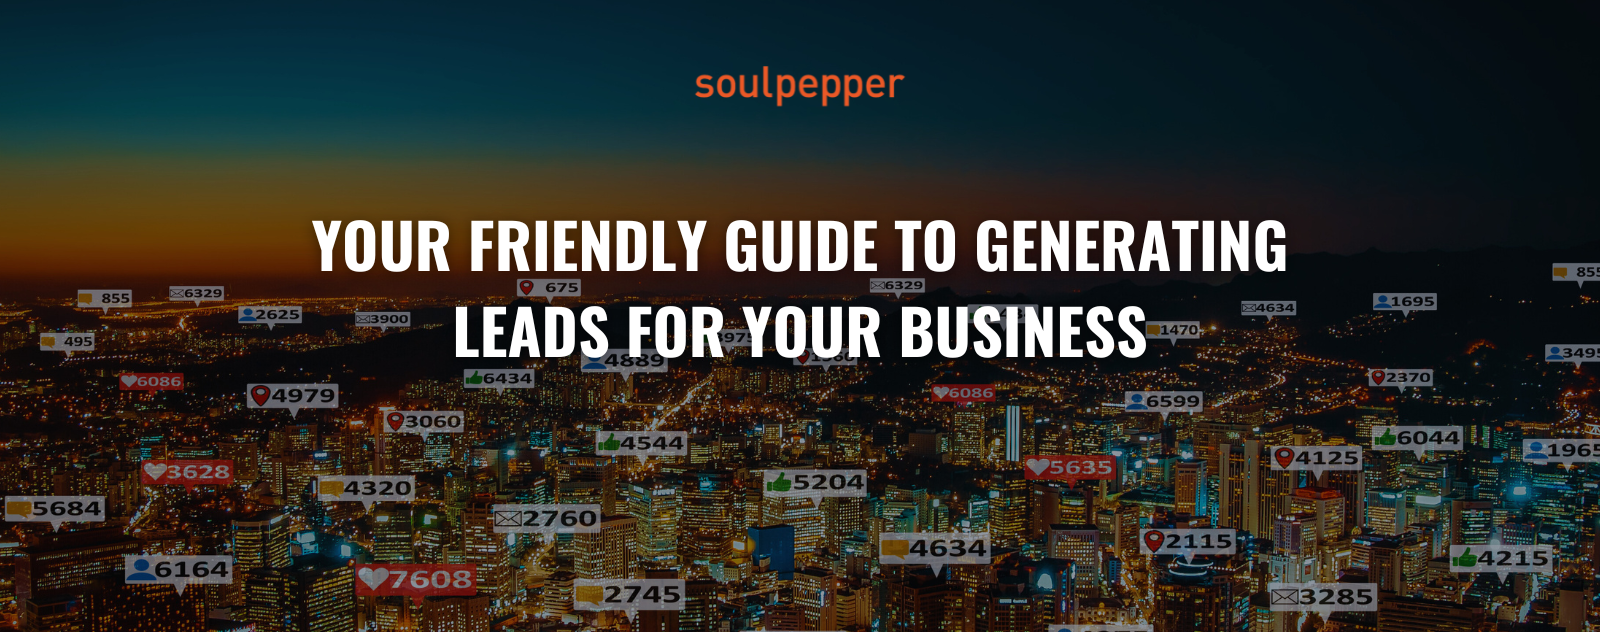 Friendly Guide to Generating Leads for Your Business